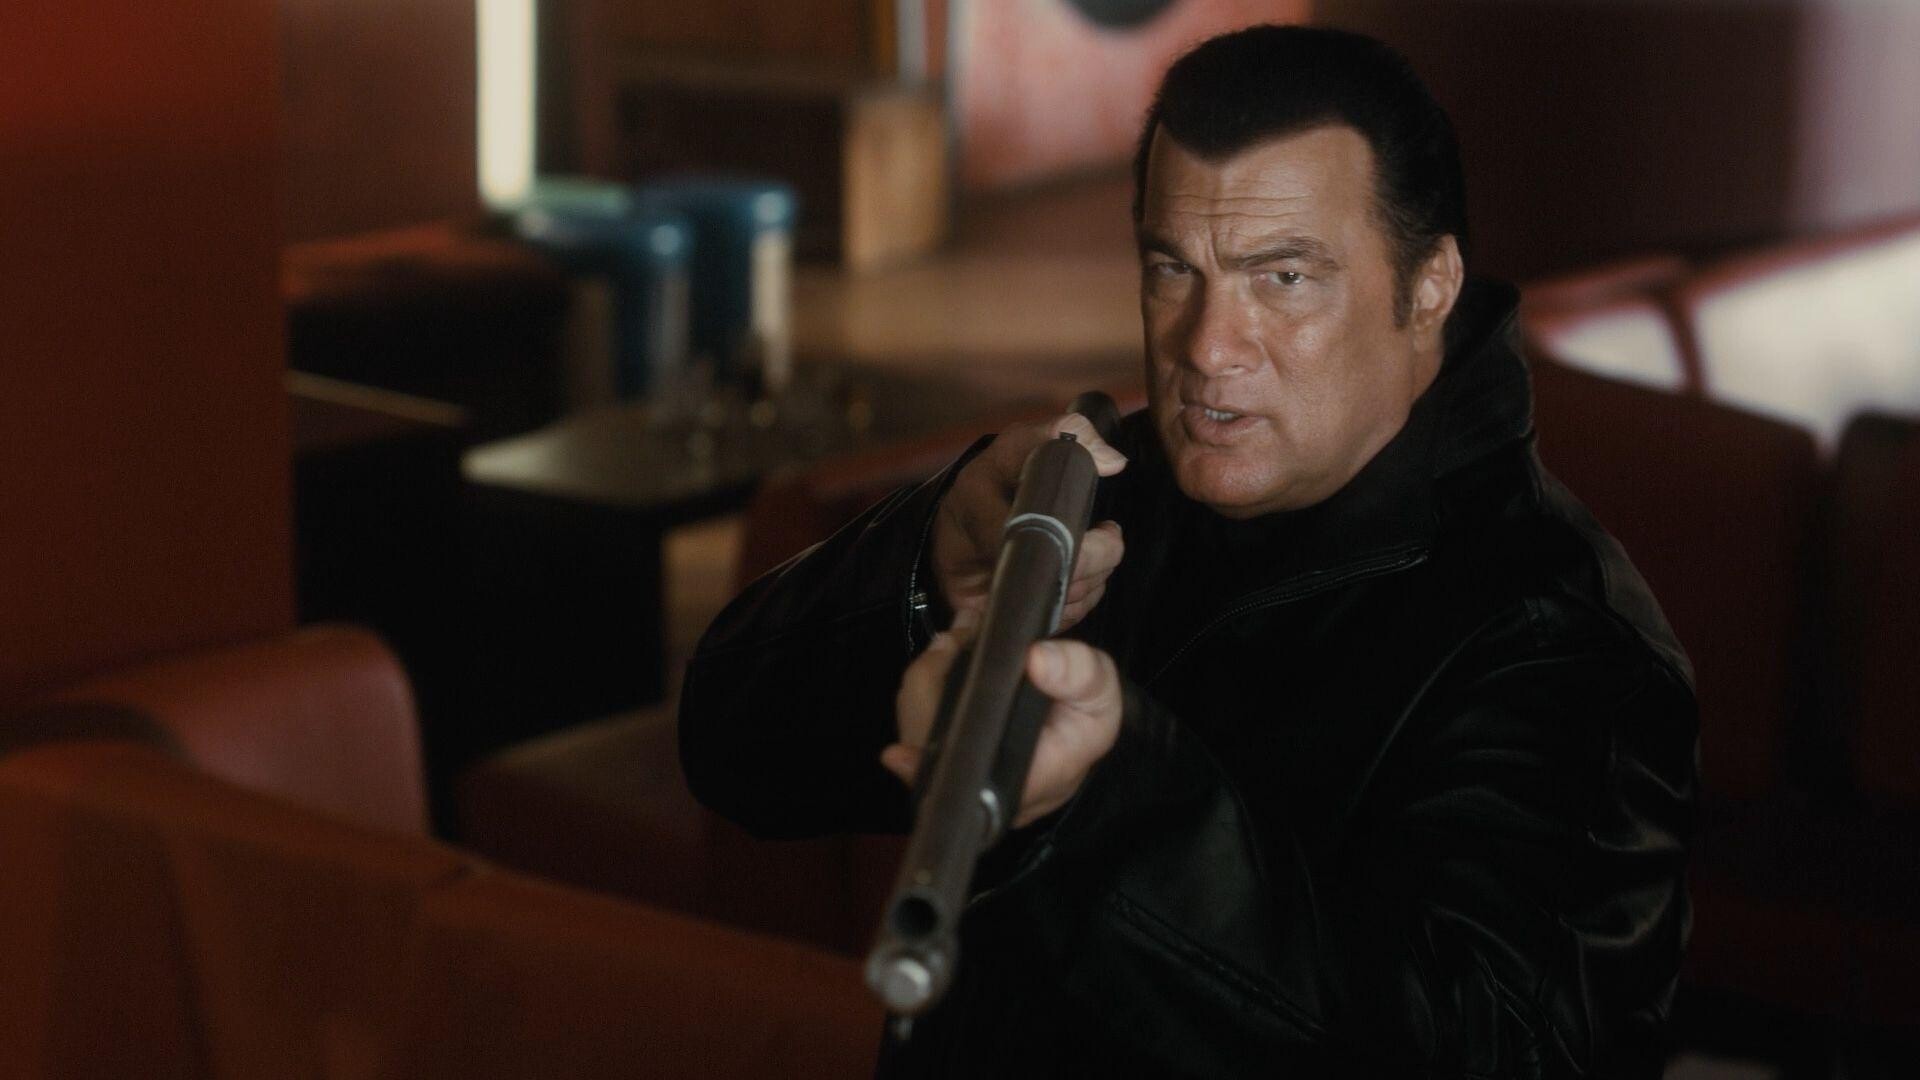 Steven Seagal: Born to Raise Hell, A 2010 American action film, Lauro Chartrand, Seagal as IDTF Agent Robert “Bobby” Samuels. 1920x1080 Full HD Background.